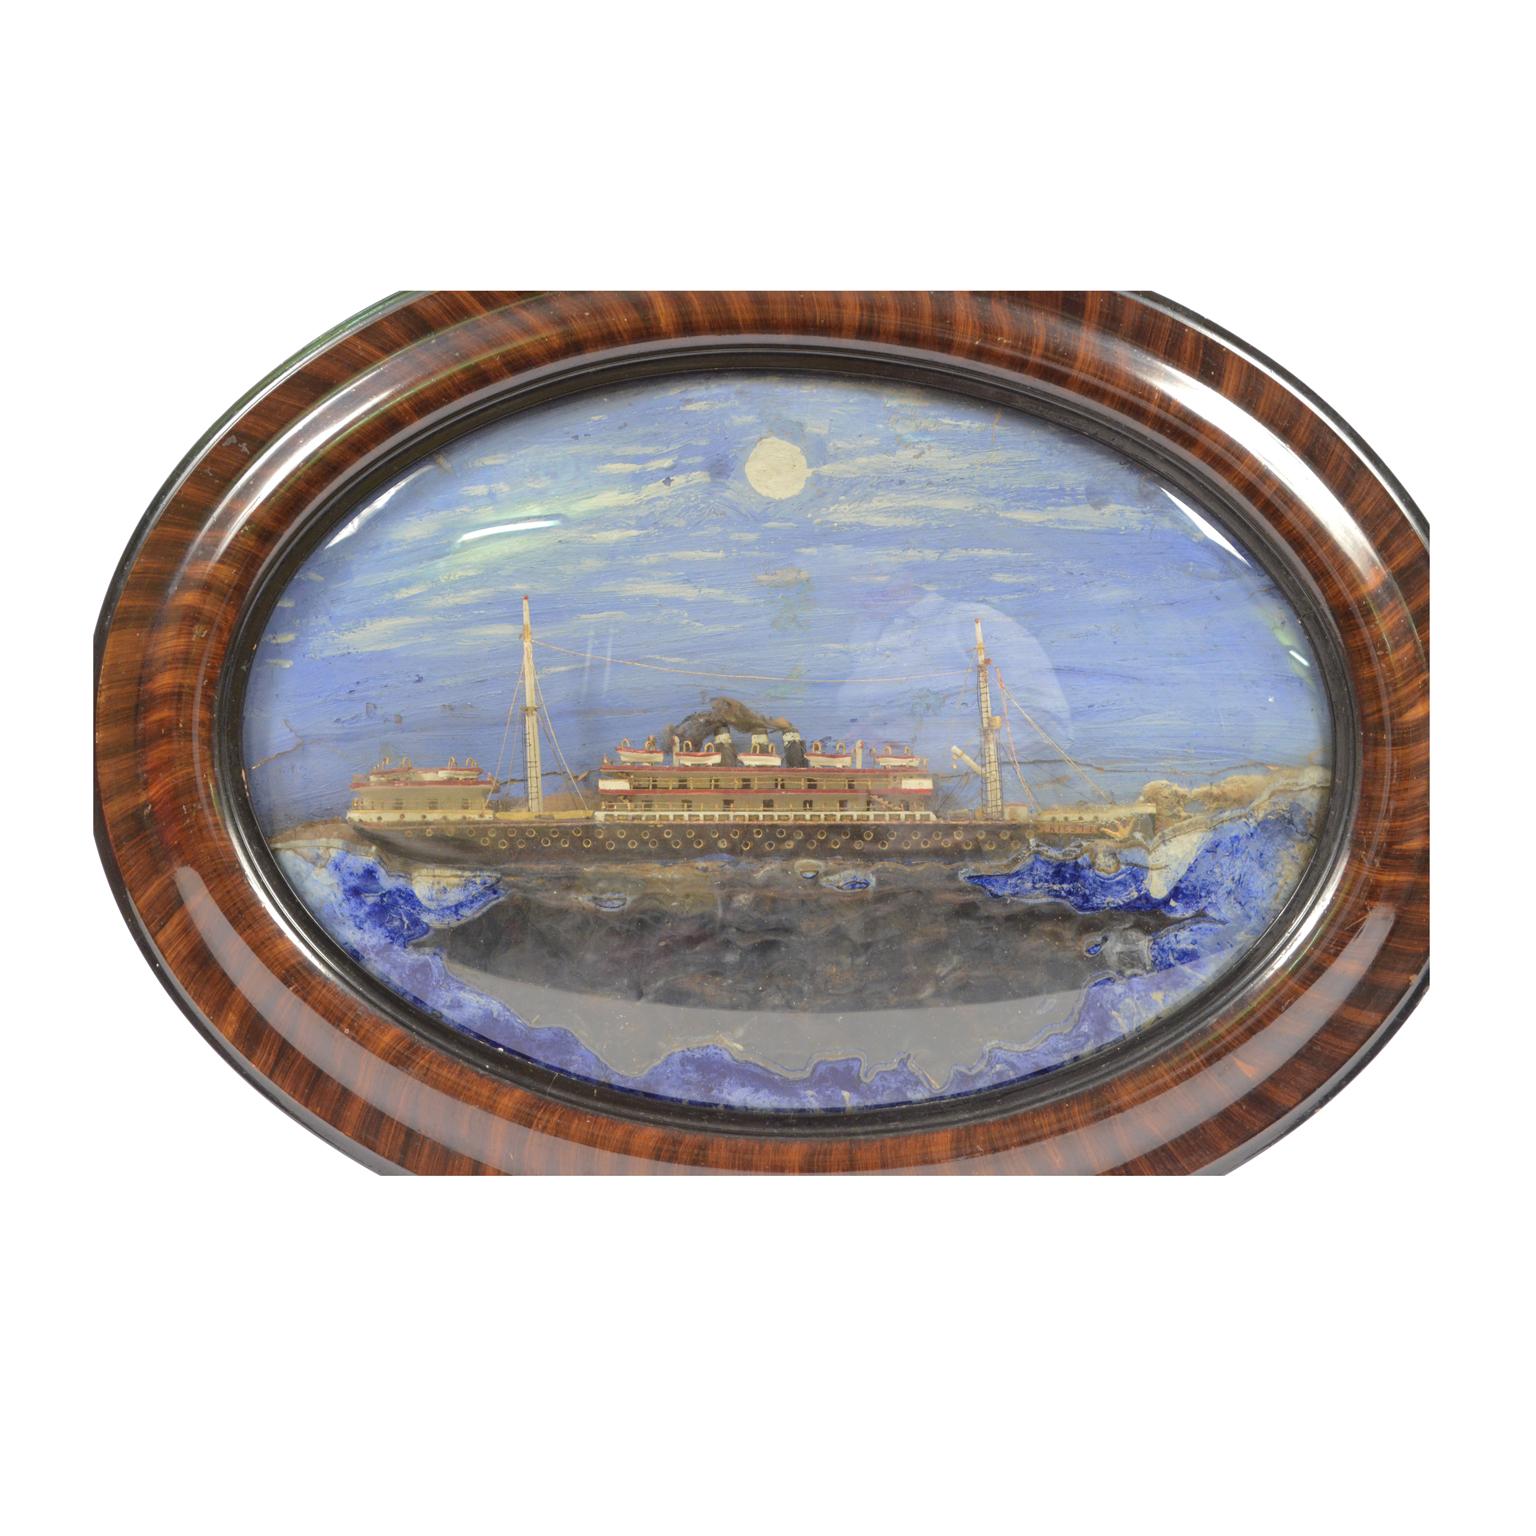 Early 20th Century Naval Diorama of the Trieste Steamship Launched in 1908